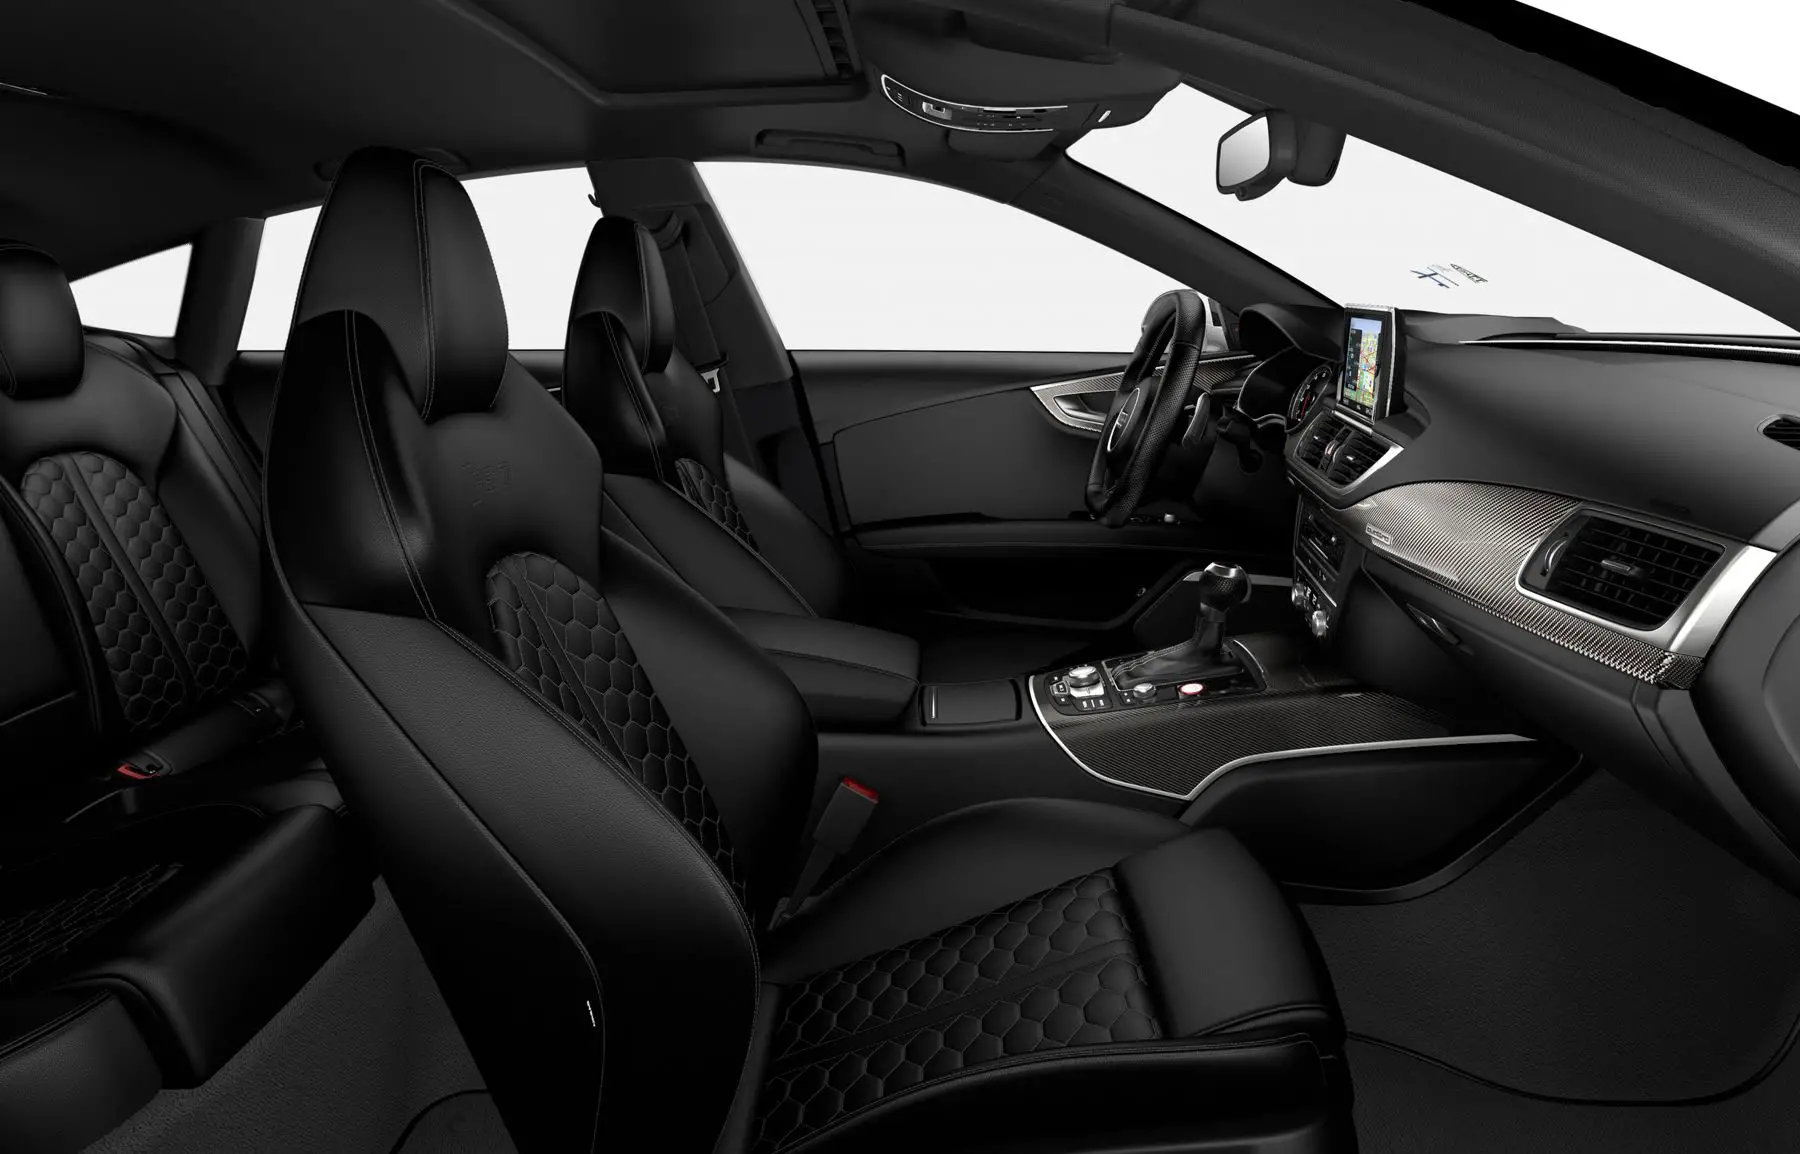 Audi Rs7 Performance 2016 Interior Image Gallery Pictures